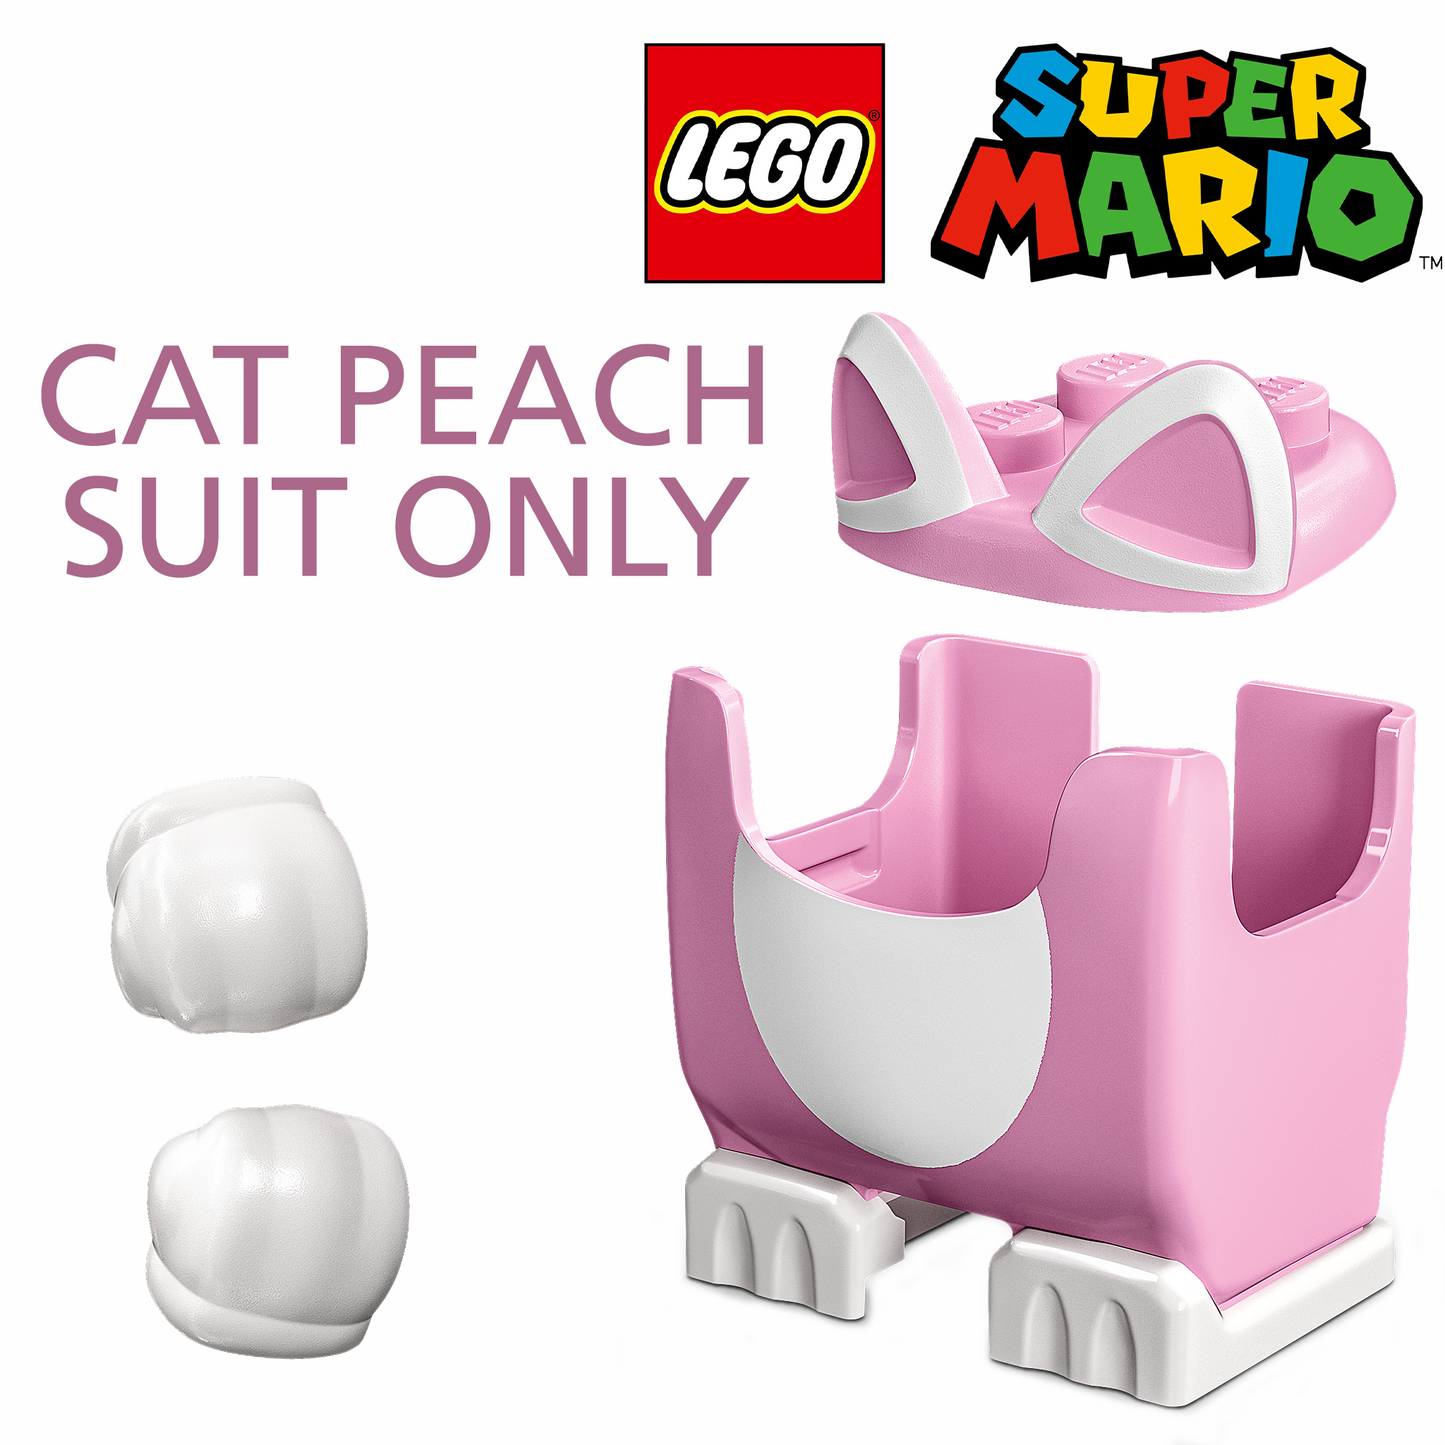 LEGO CAT PEACH SUIT ONLY (LEGO Super Mario) NEW & Unsealed - RARE From #71407